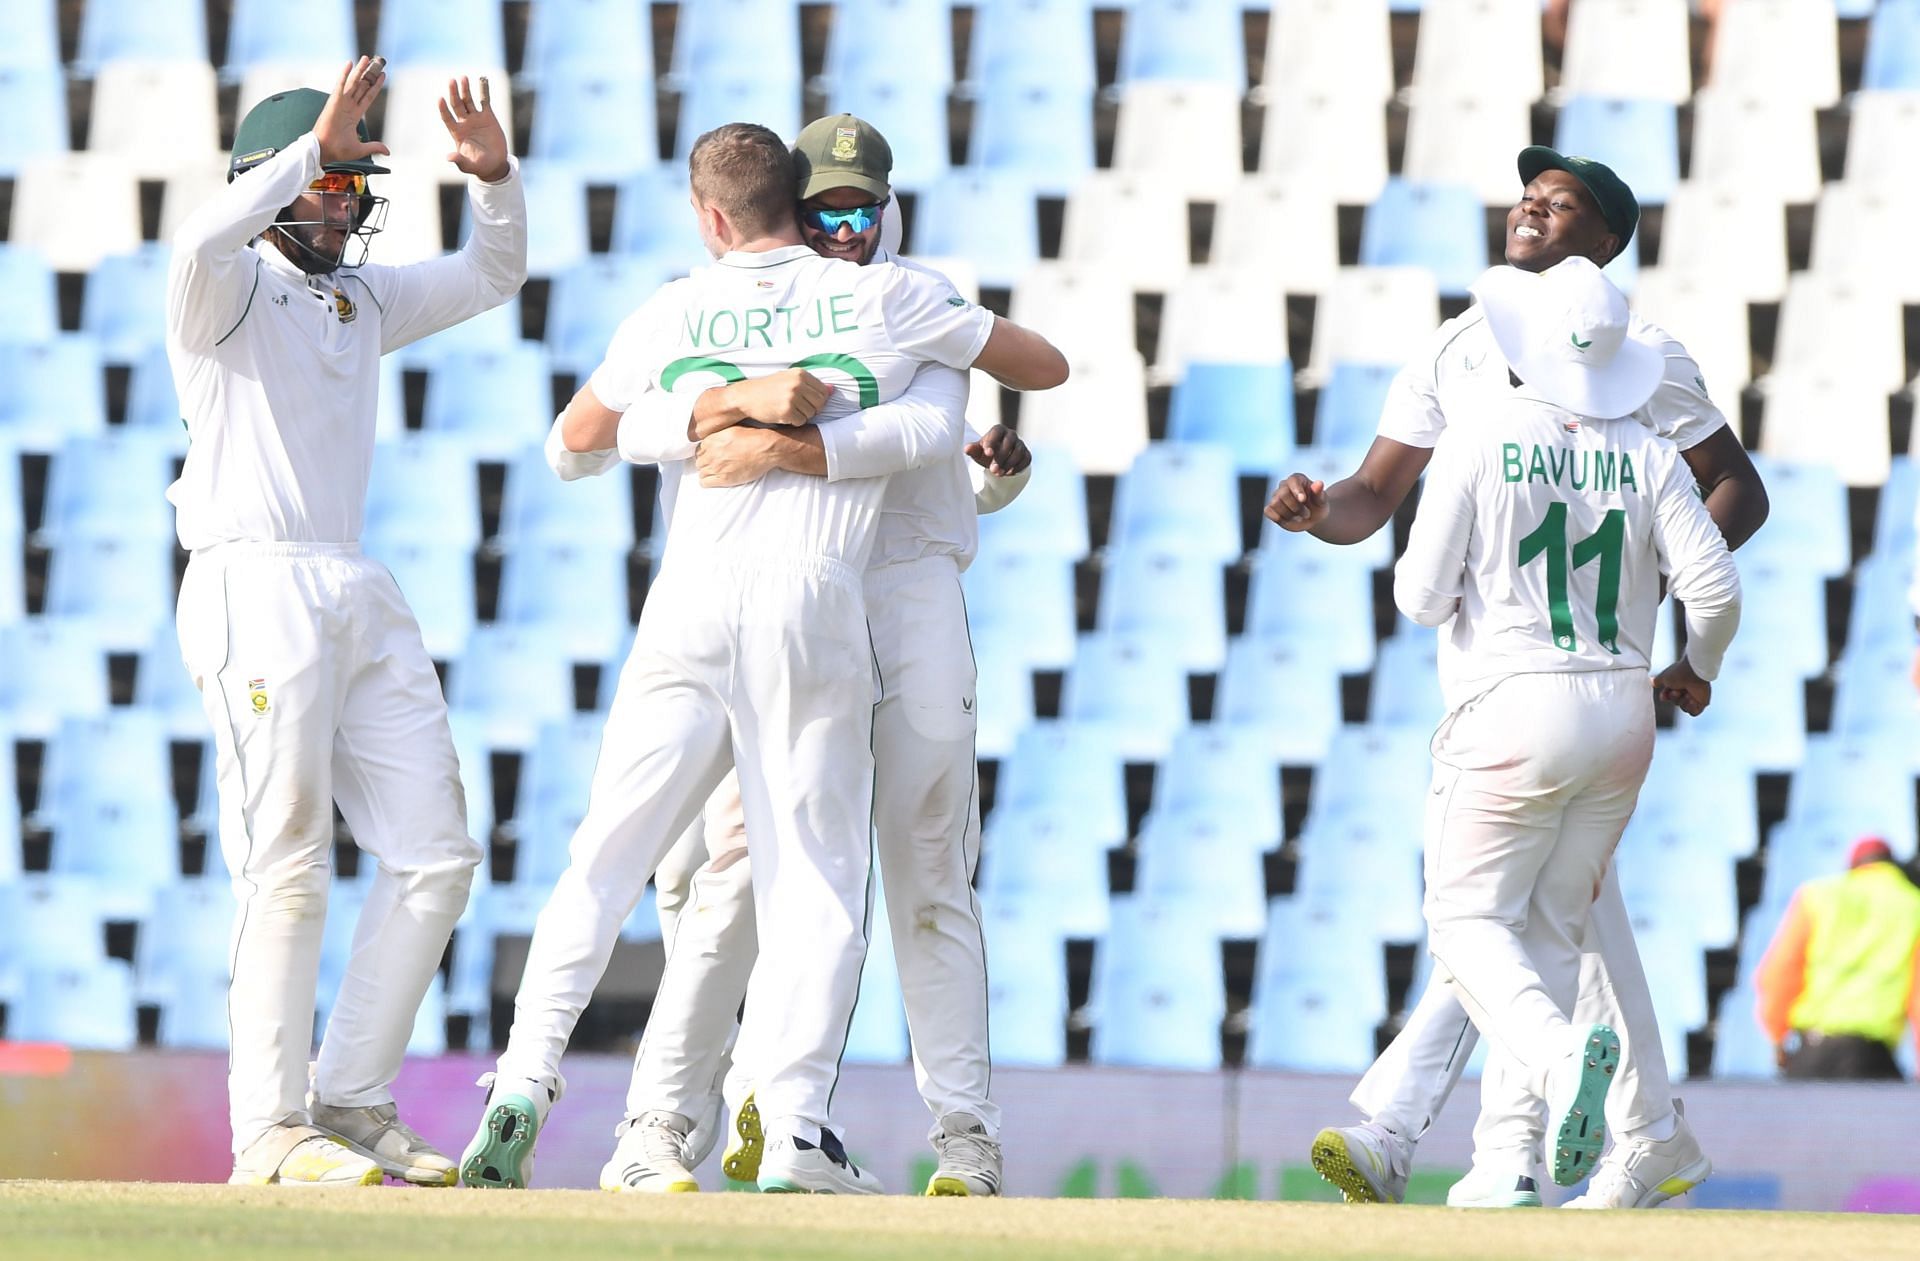 South Africa players celebrates a wicket. (Pic: Getty Images)